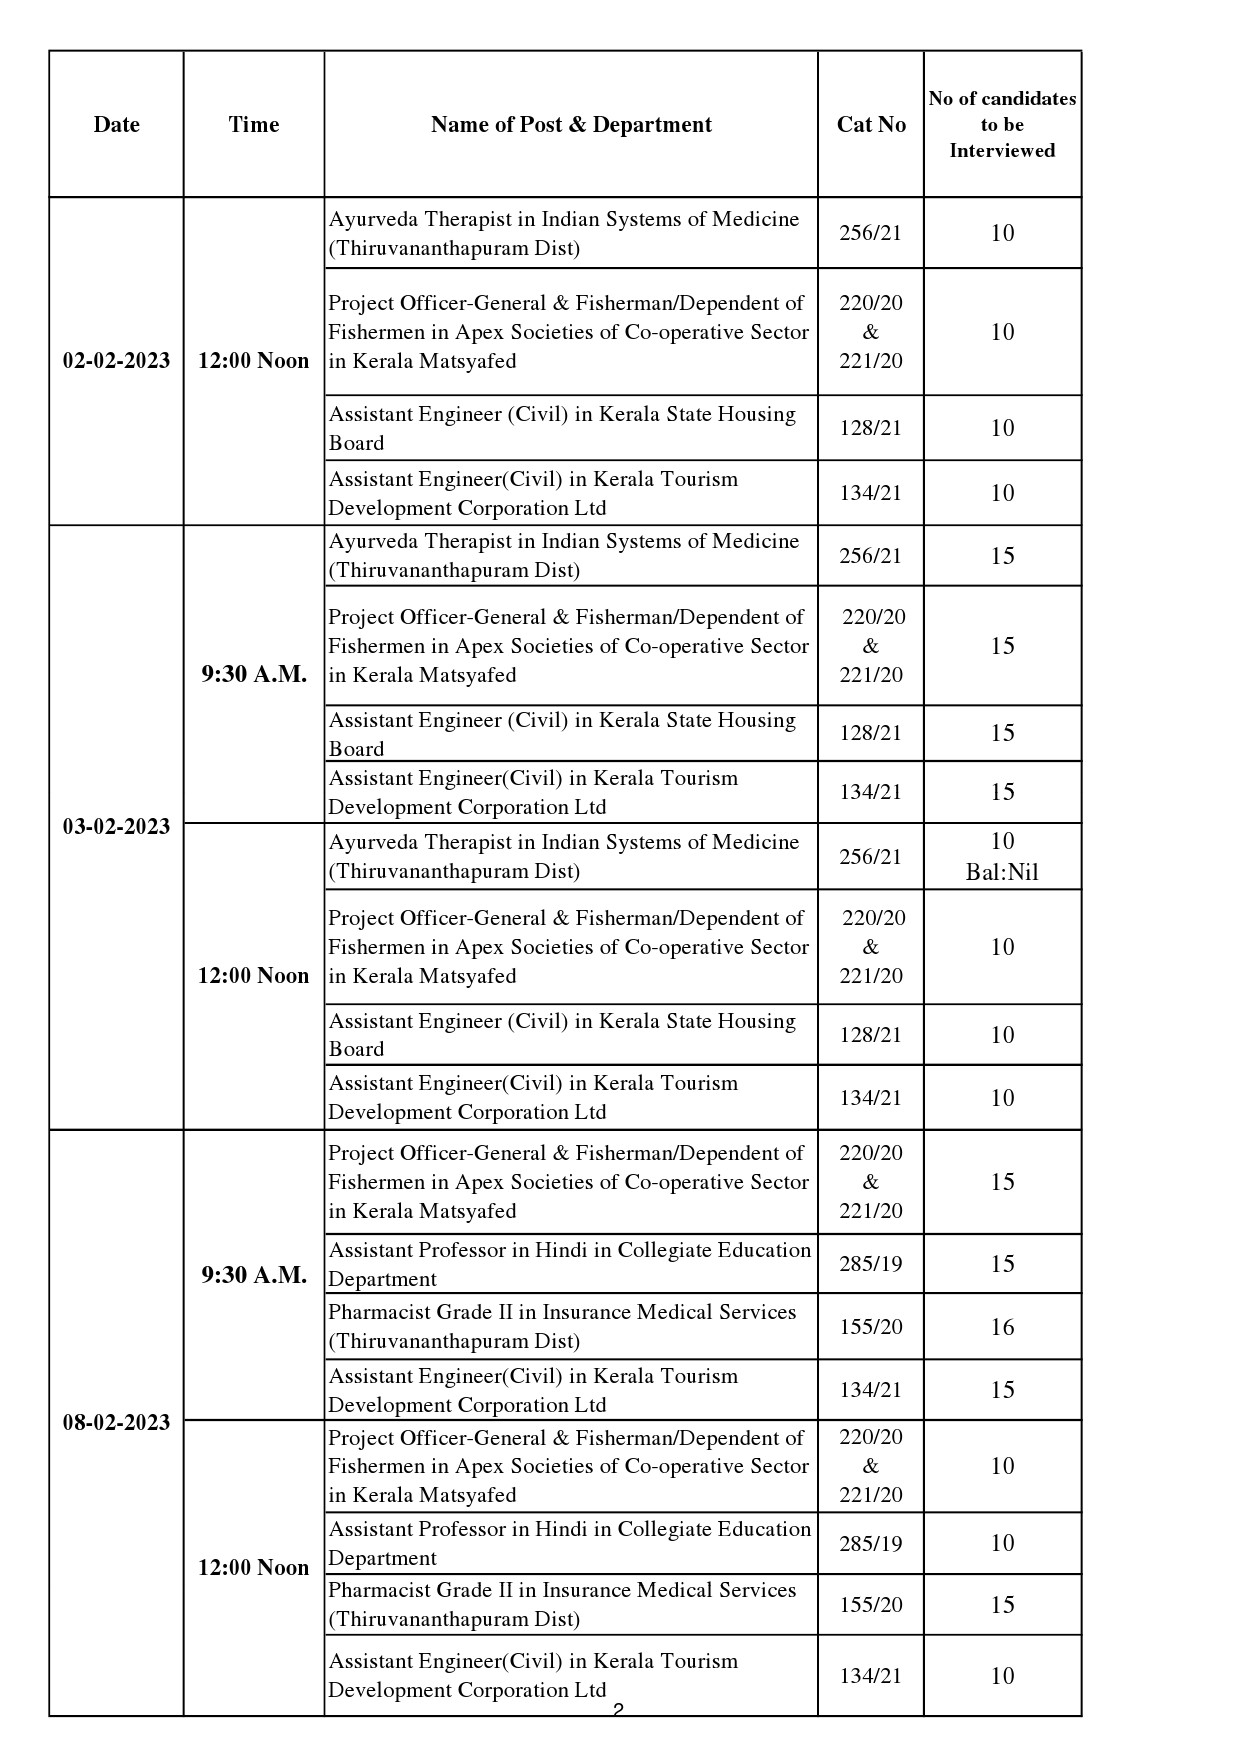 KPSC Interview Programme For The Month Of February 2023 - Notification Image 2